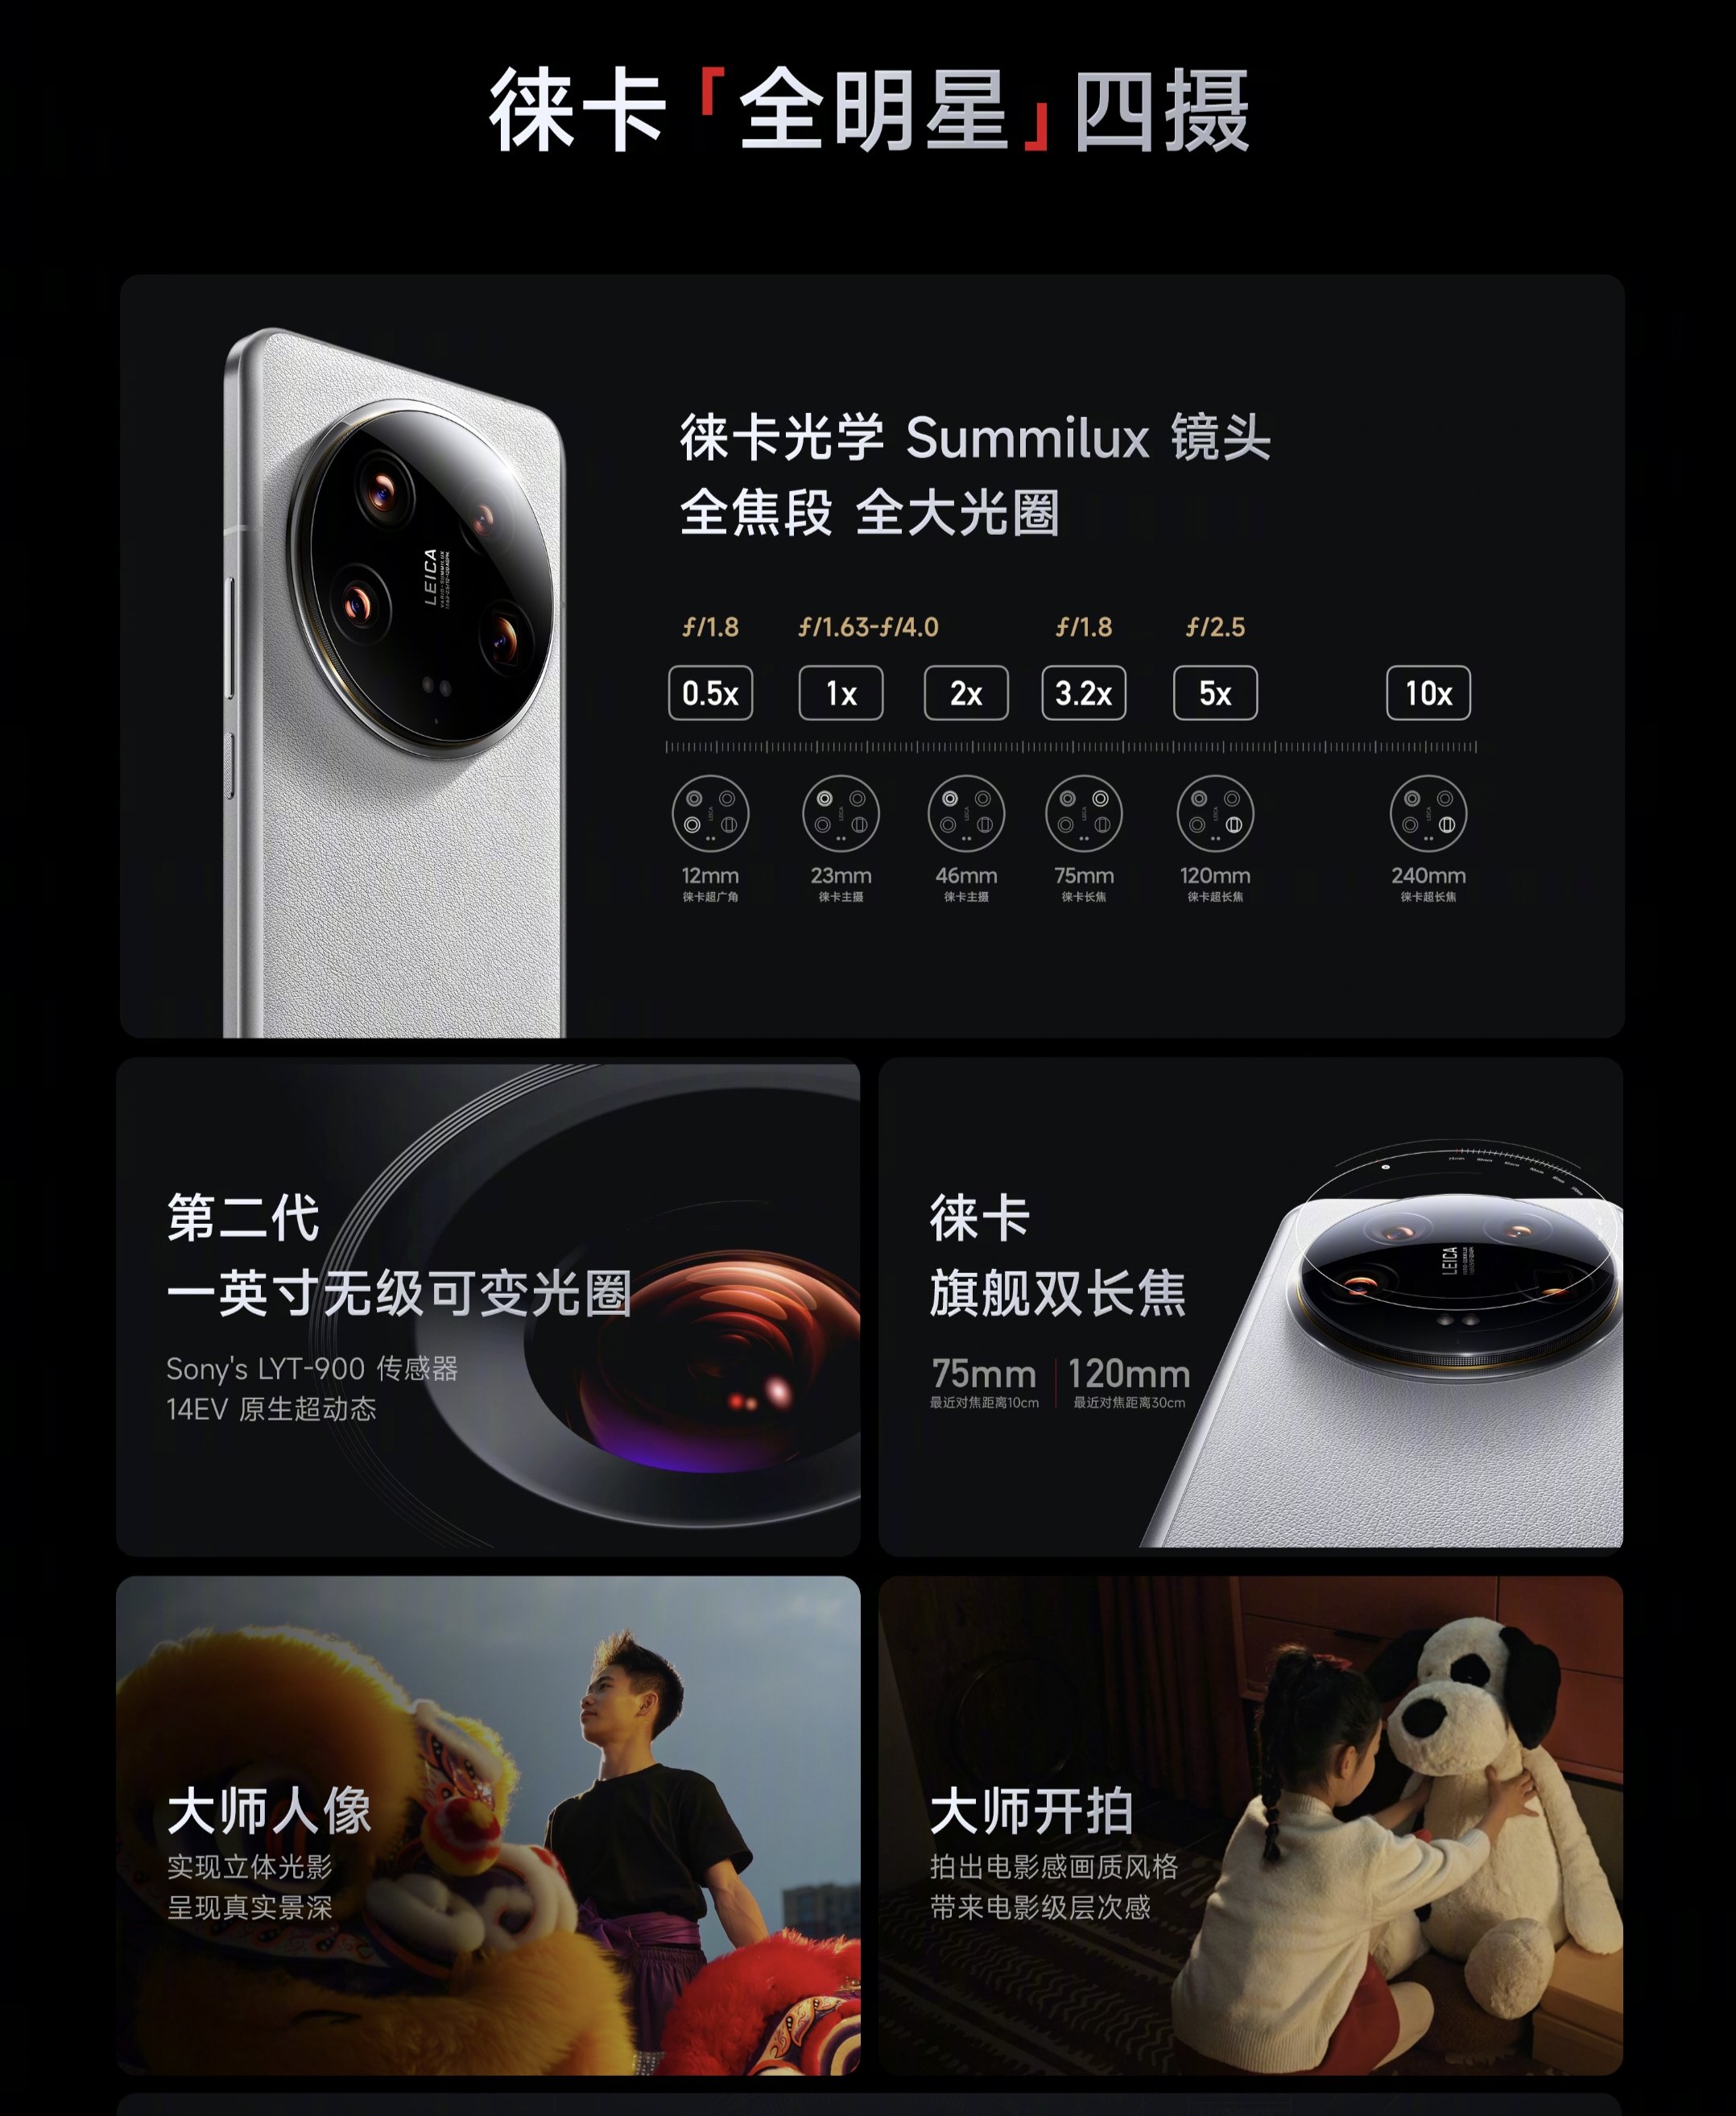 Xiaomi 14 Ultra specifications 